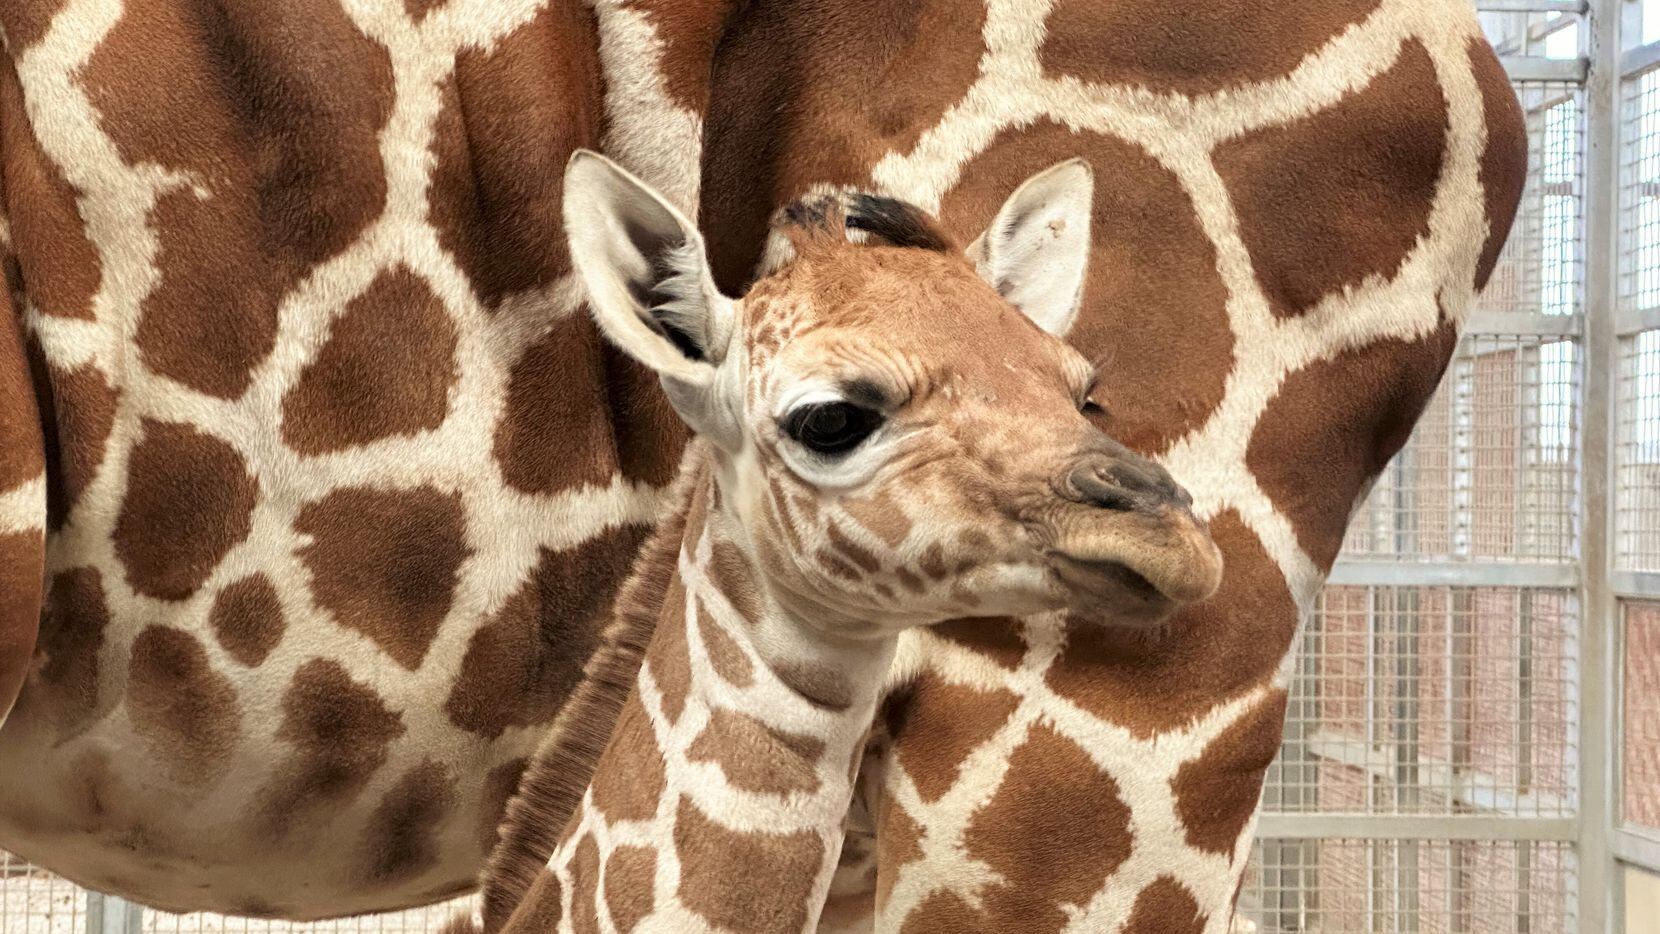 The Dallas Zoo welcomed a baby giraffe to the herd earlier this month on March 19 to mom...